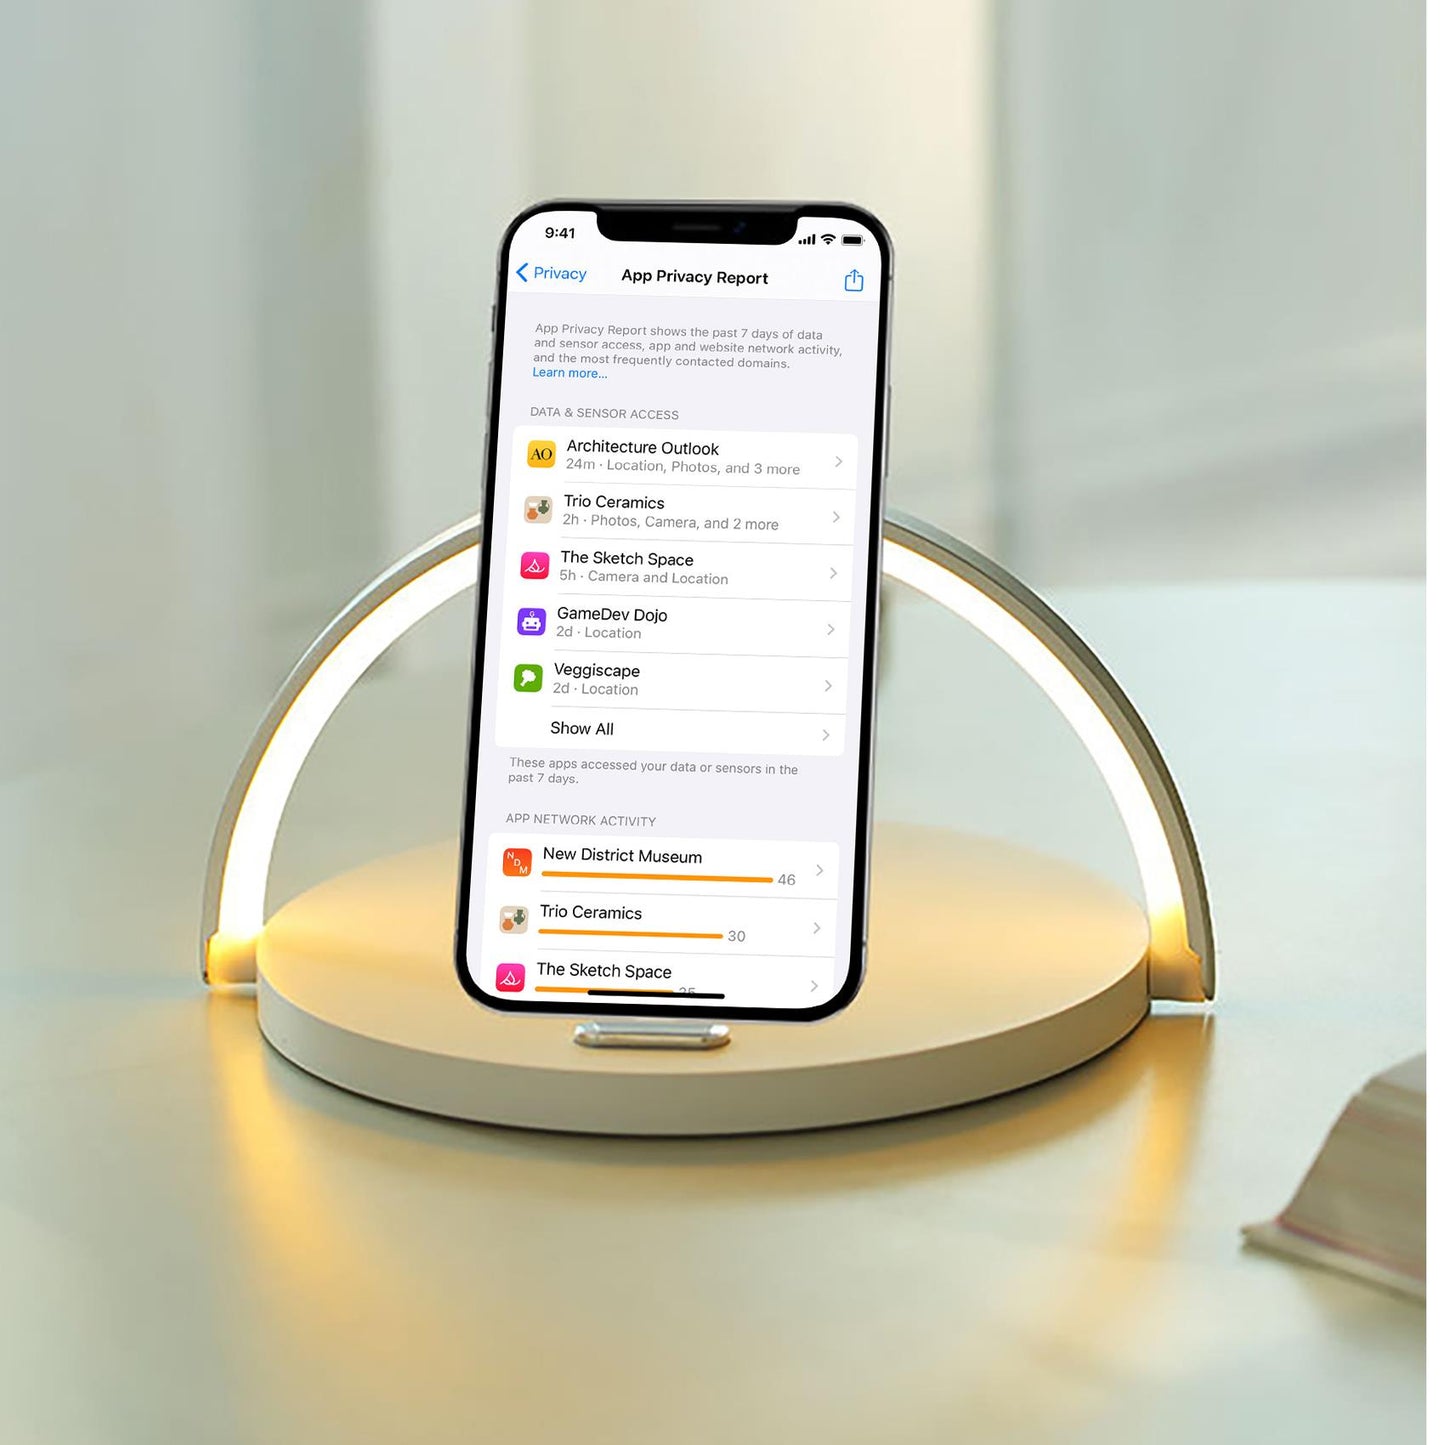 Caricabatterie wireless -Led Lamp Wireless Charger 15W